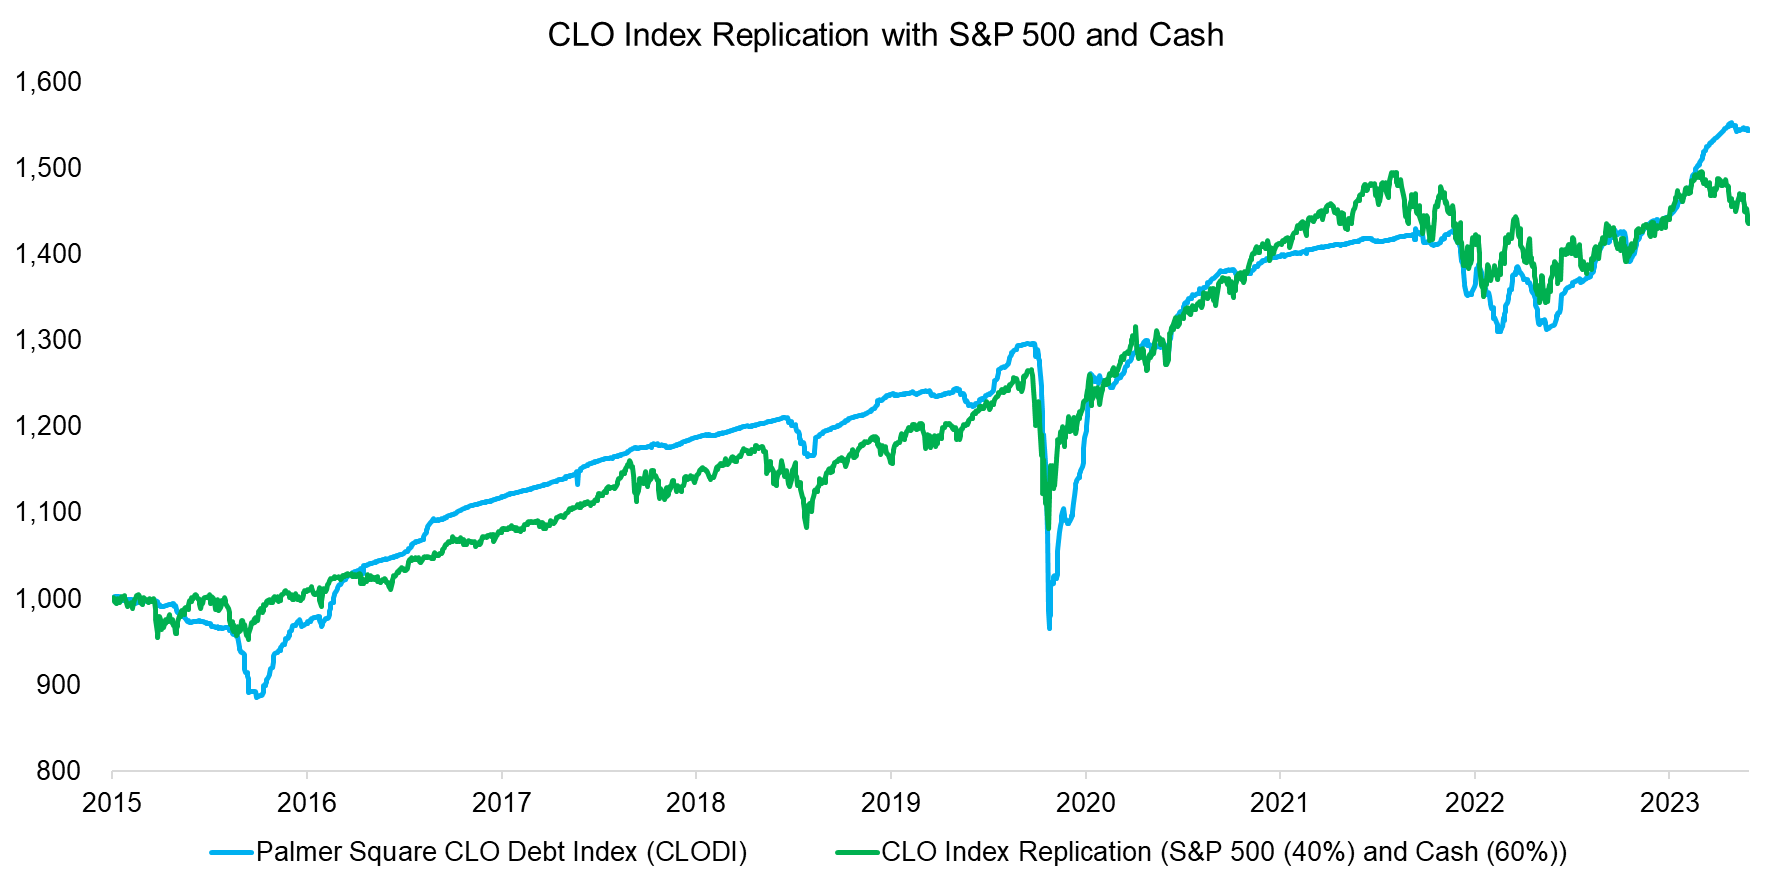 CLO Index Replication with S&P 500 and Cash